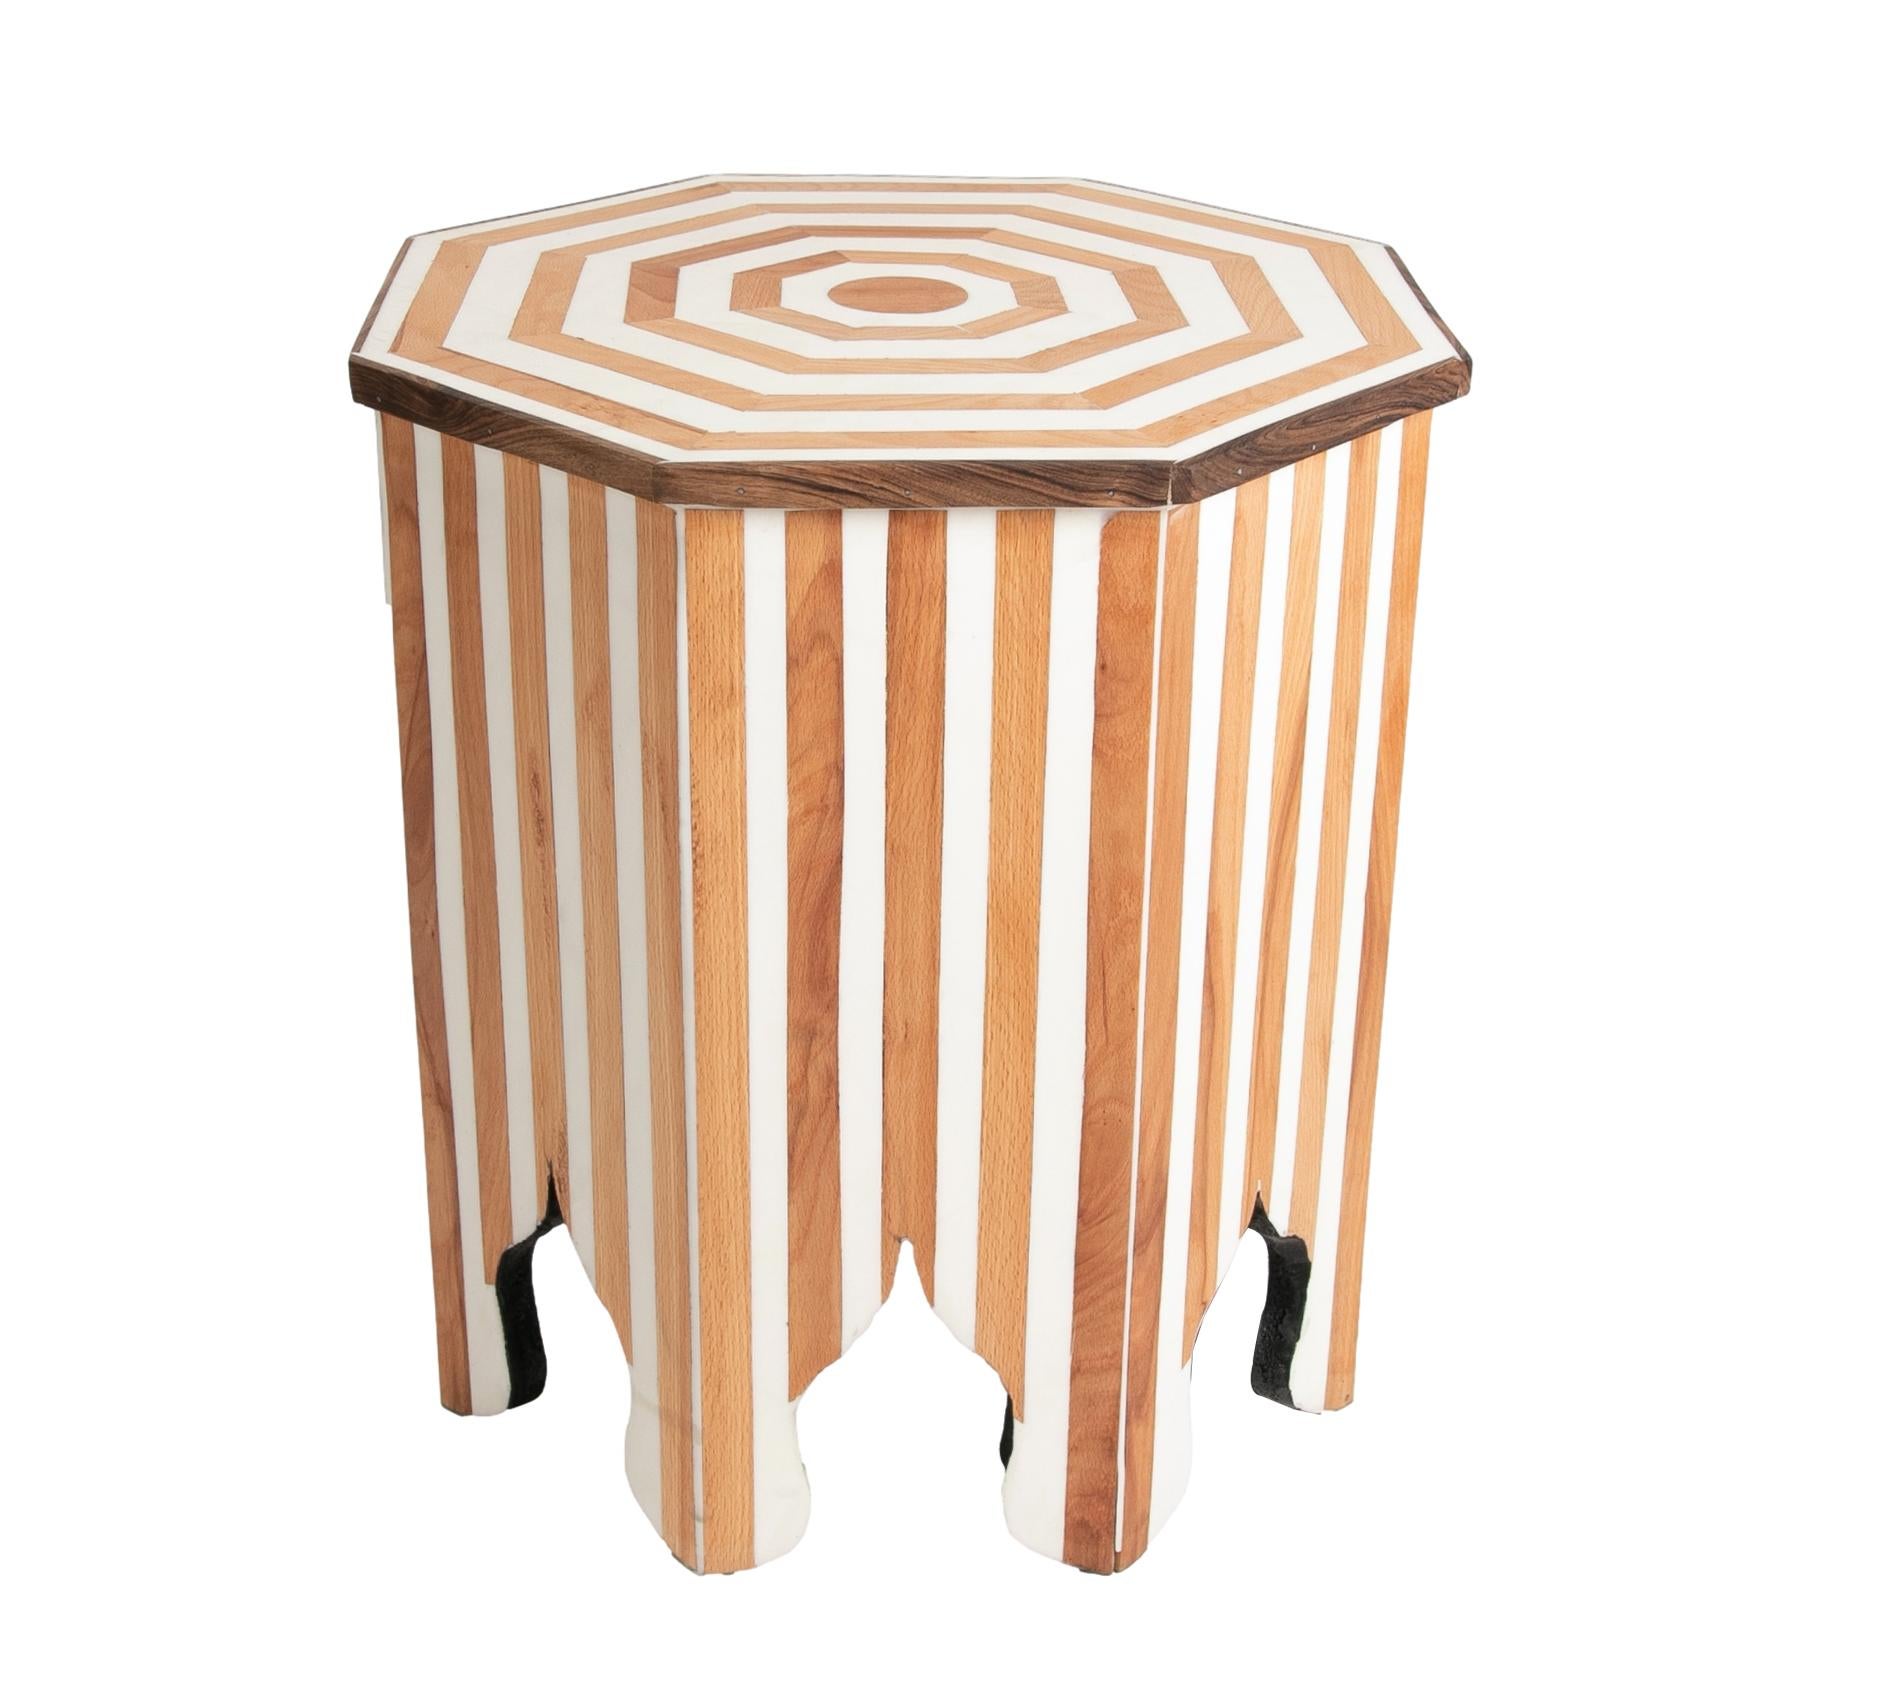 Pair of octogonal sidetables made in wood and resin. The top surface shows a concentric design that matches the stripes in the legs; both of them mix the natural color of the wood with the white from the resin creating a nice match.